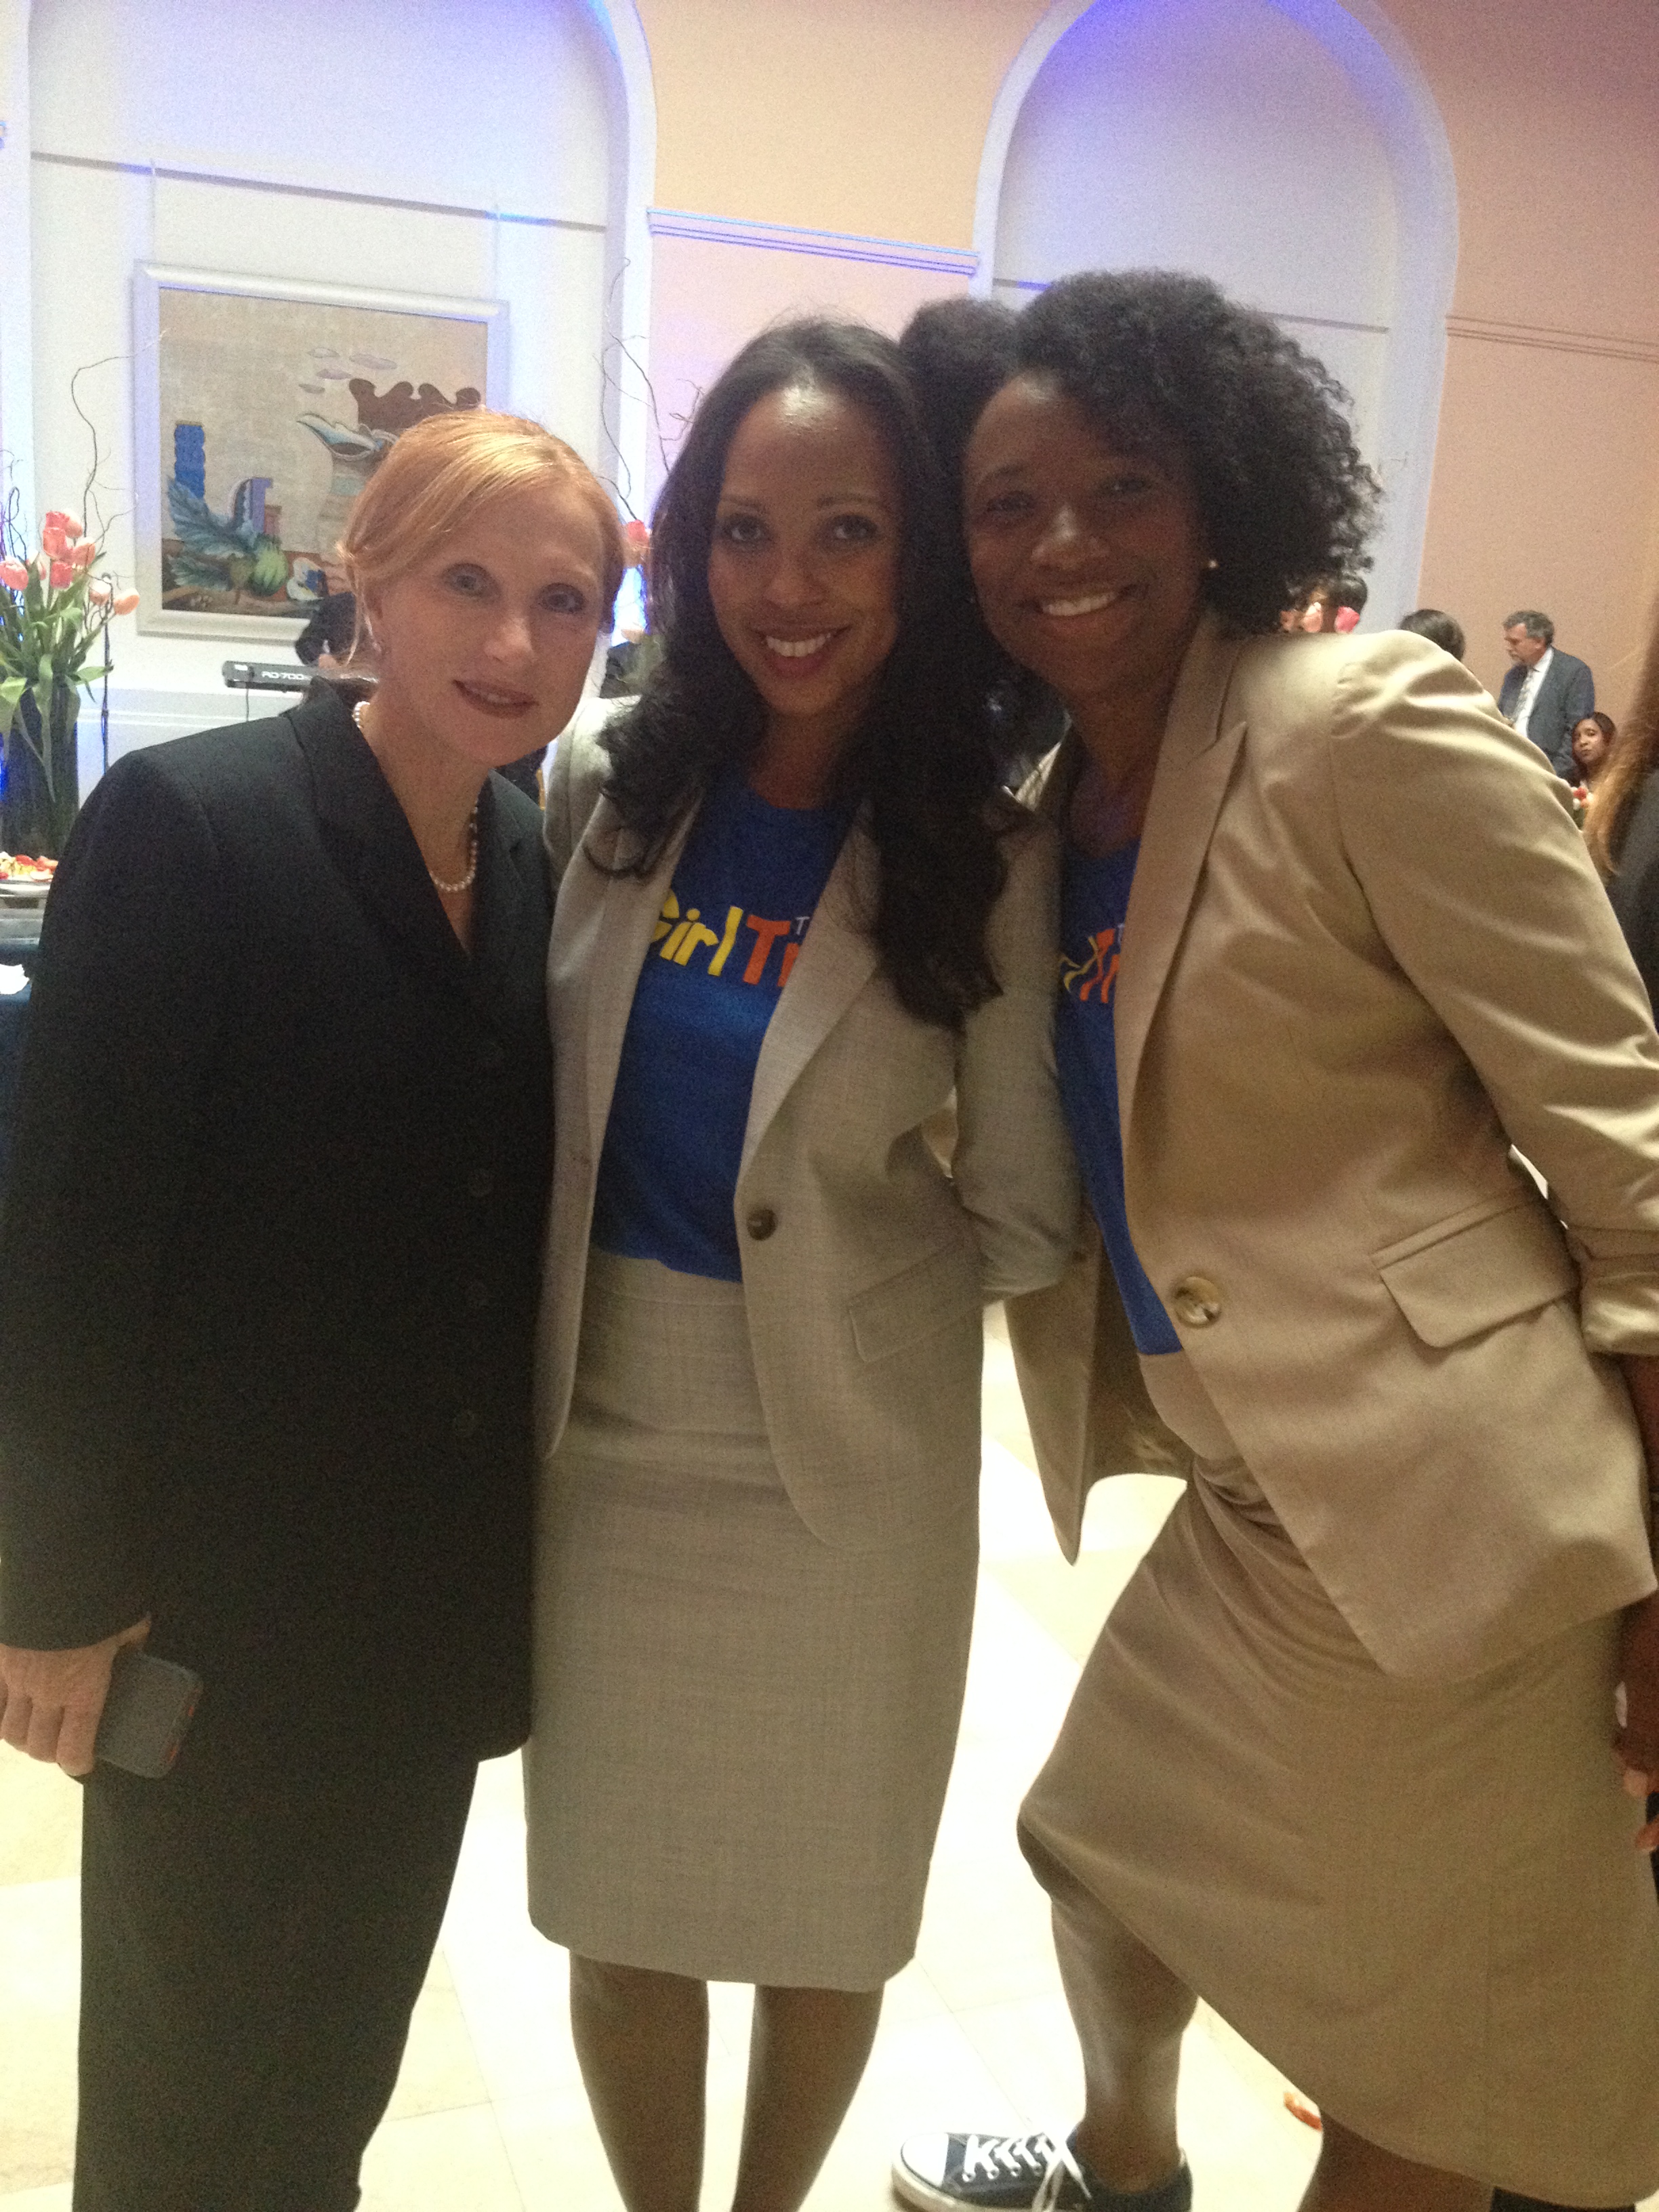 VIcki Crawford, Clinton Foundation with Vanessa Garrison and Morgan Dixon from Girl Trek in Newark for the Childhood Obesity Forum.&nbsp;